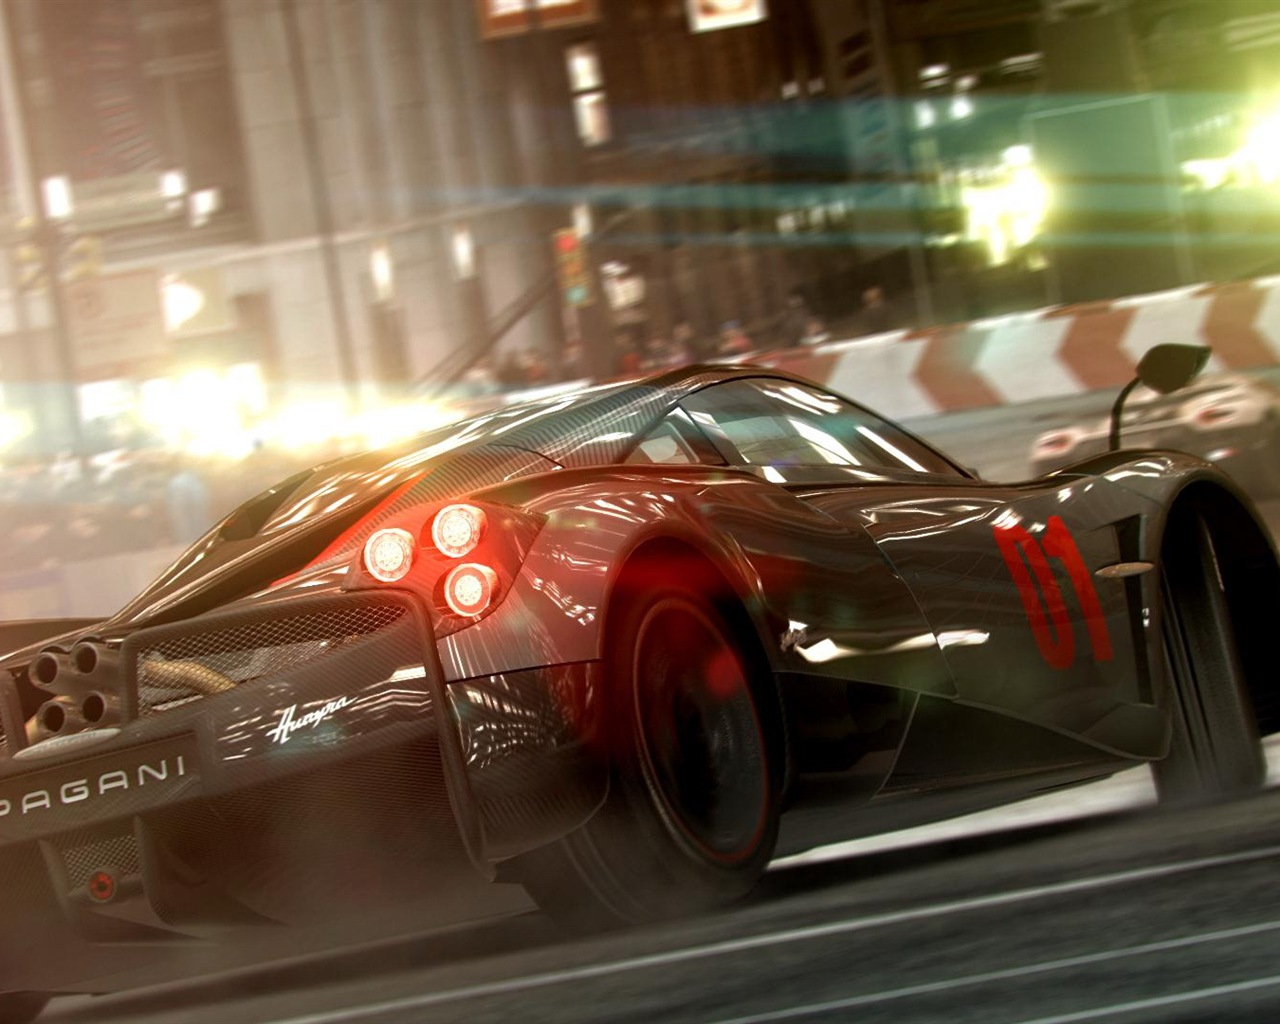 GRID: Autosport HD game wallpapers #2 - 1280x1024